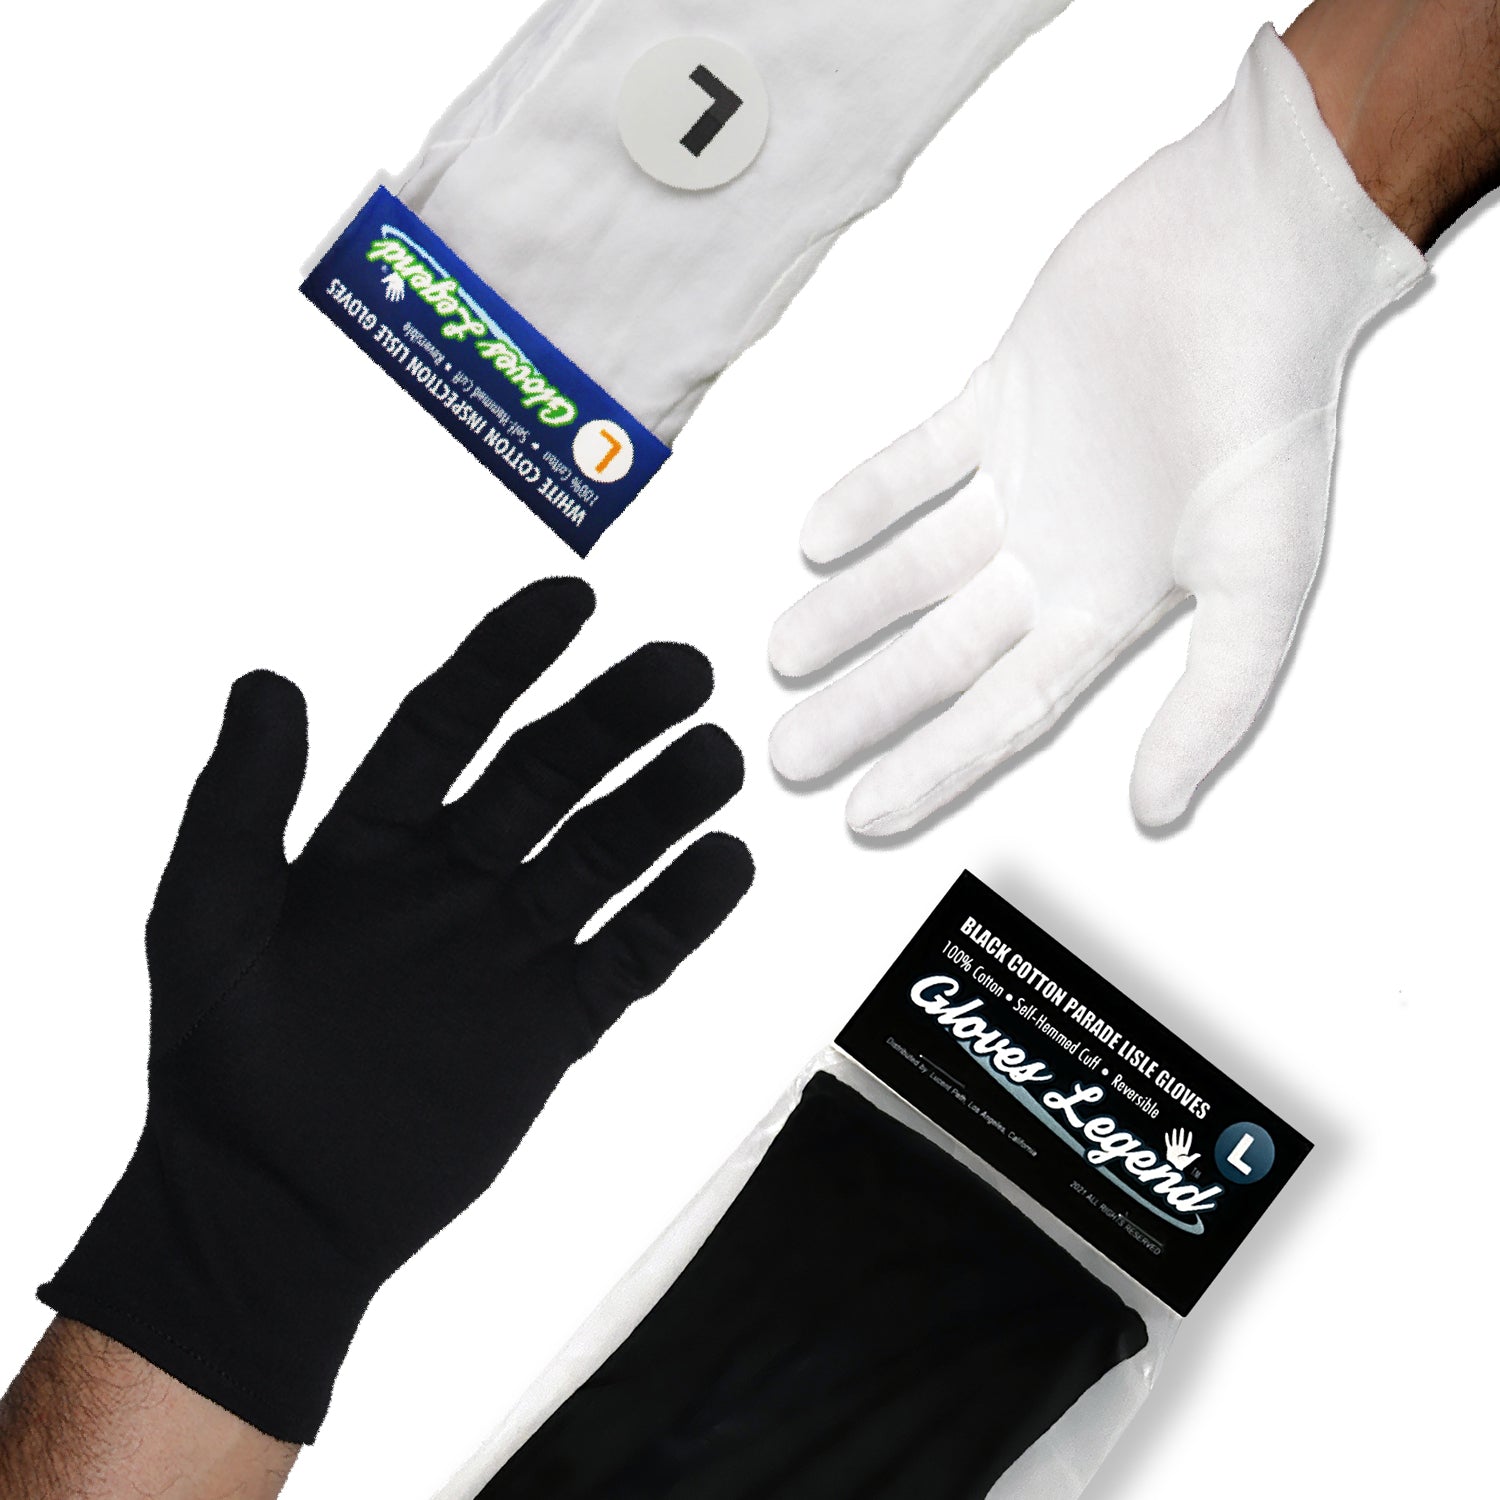 Gloves Legend Black and White Cotton Gloves - 100% Cotton Cloth Gloves - Size Large